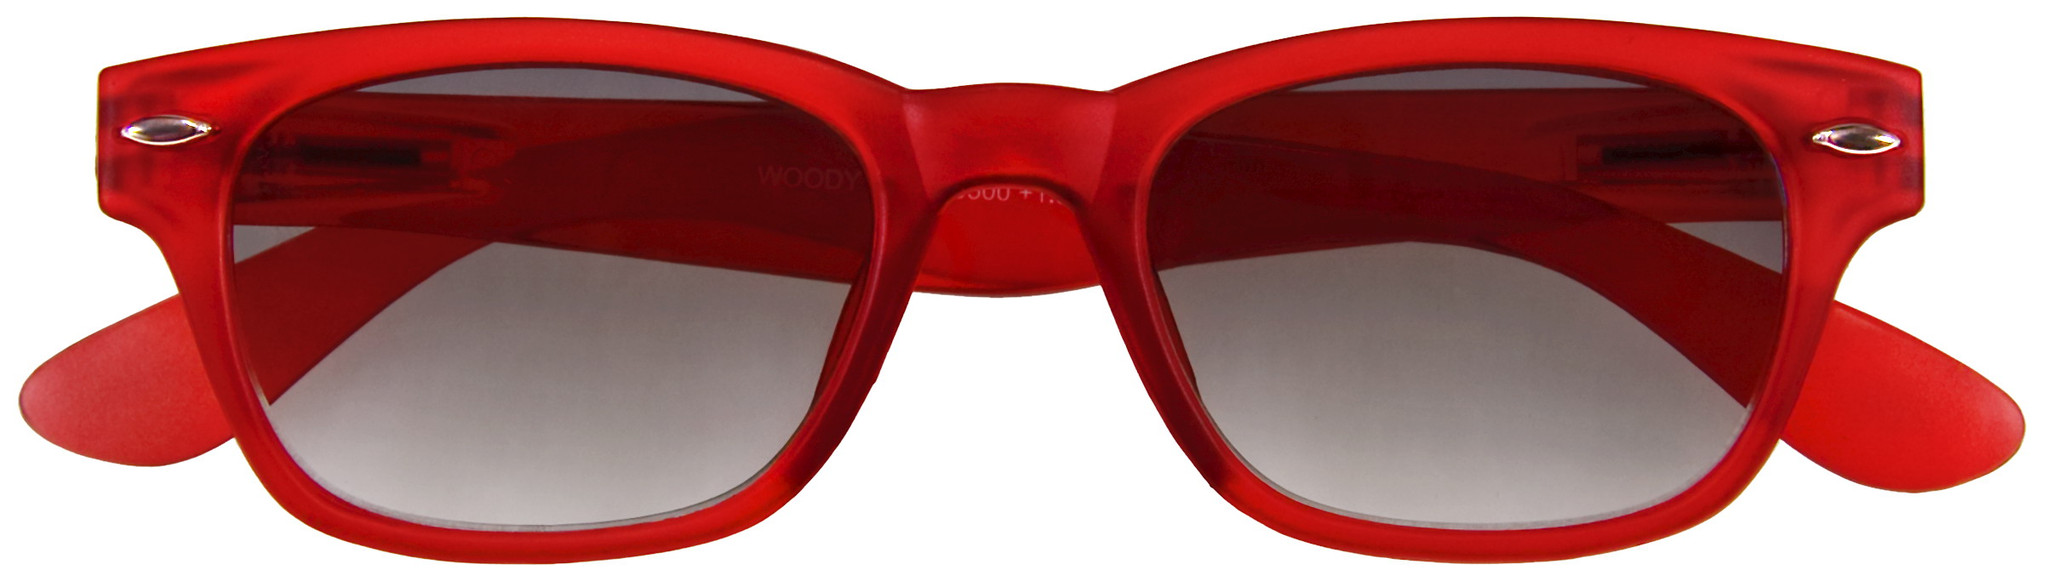 Woody Red Readers by I Need You Readers